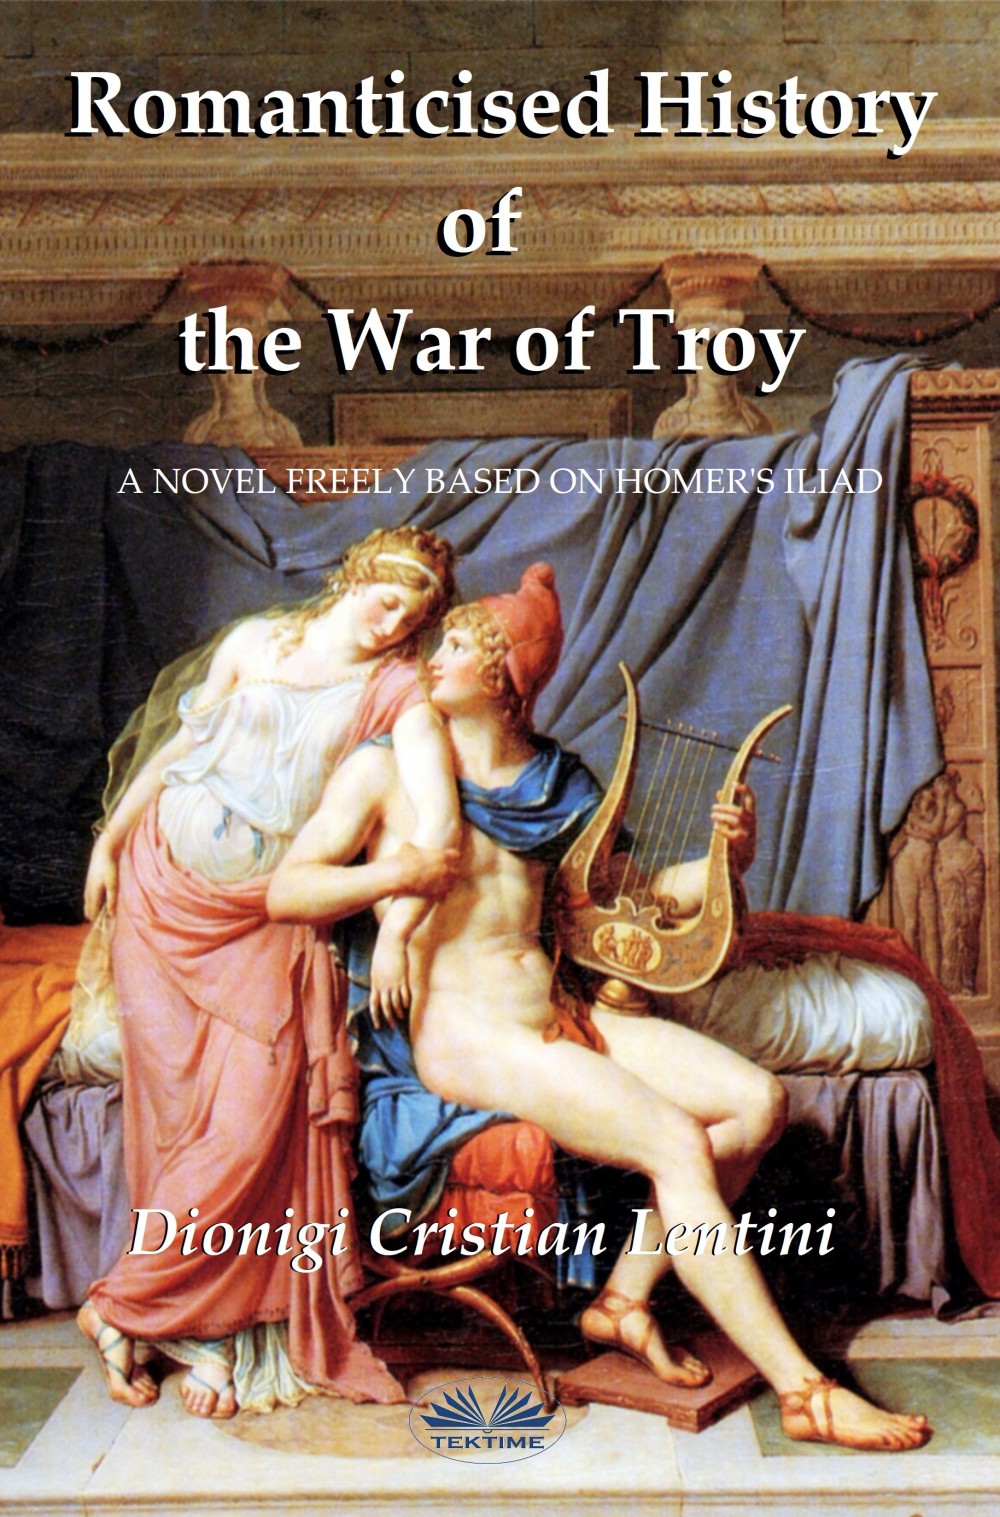 Romanticised History of the War of Troy